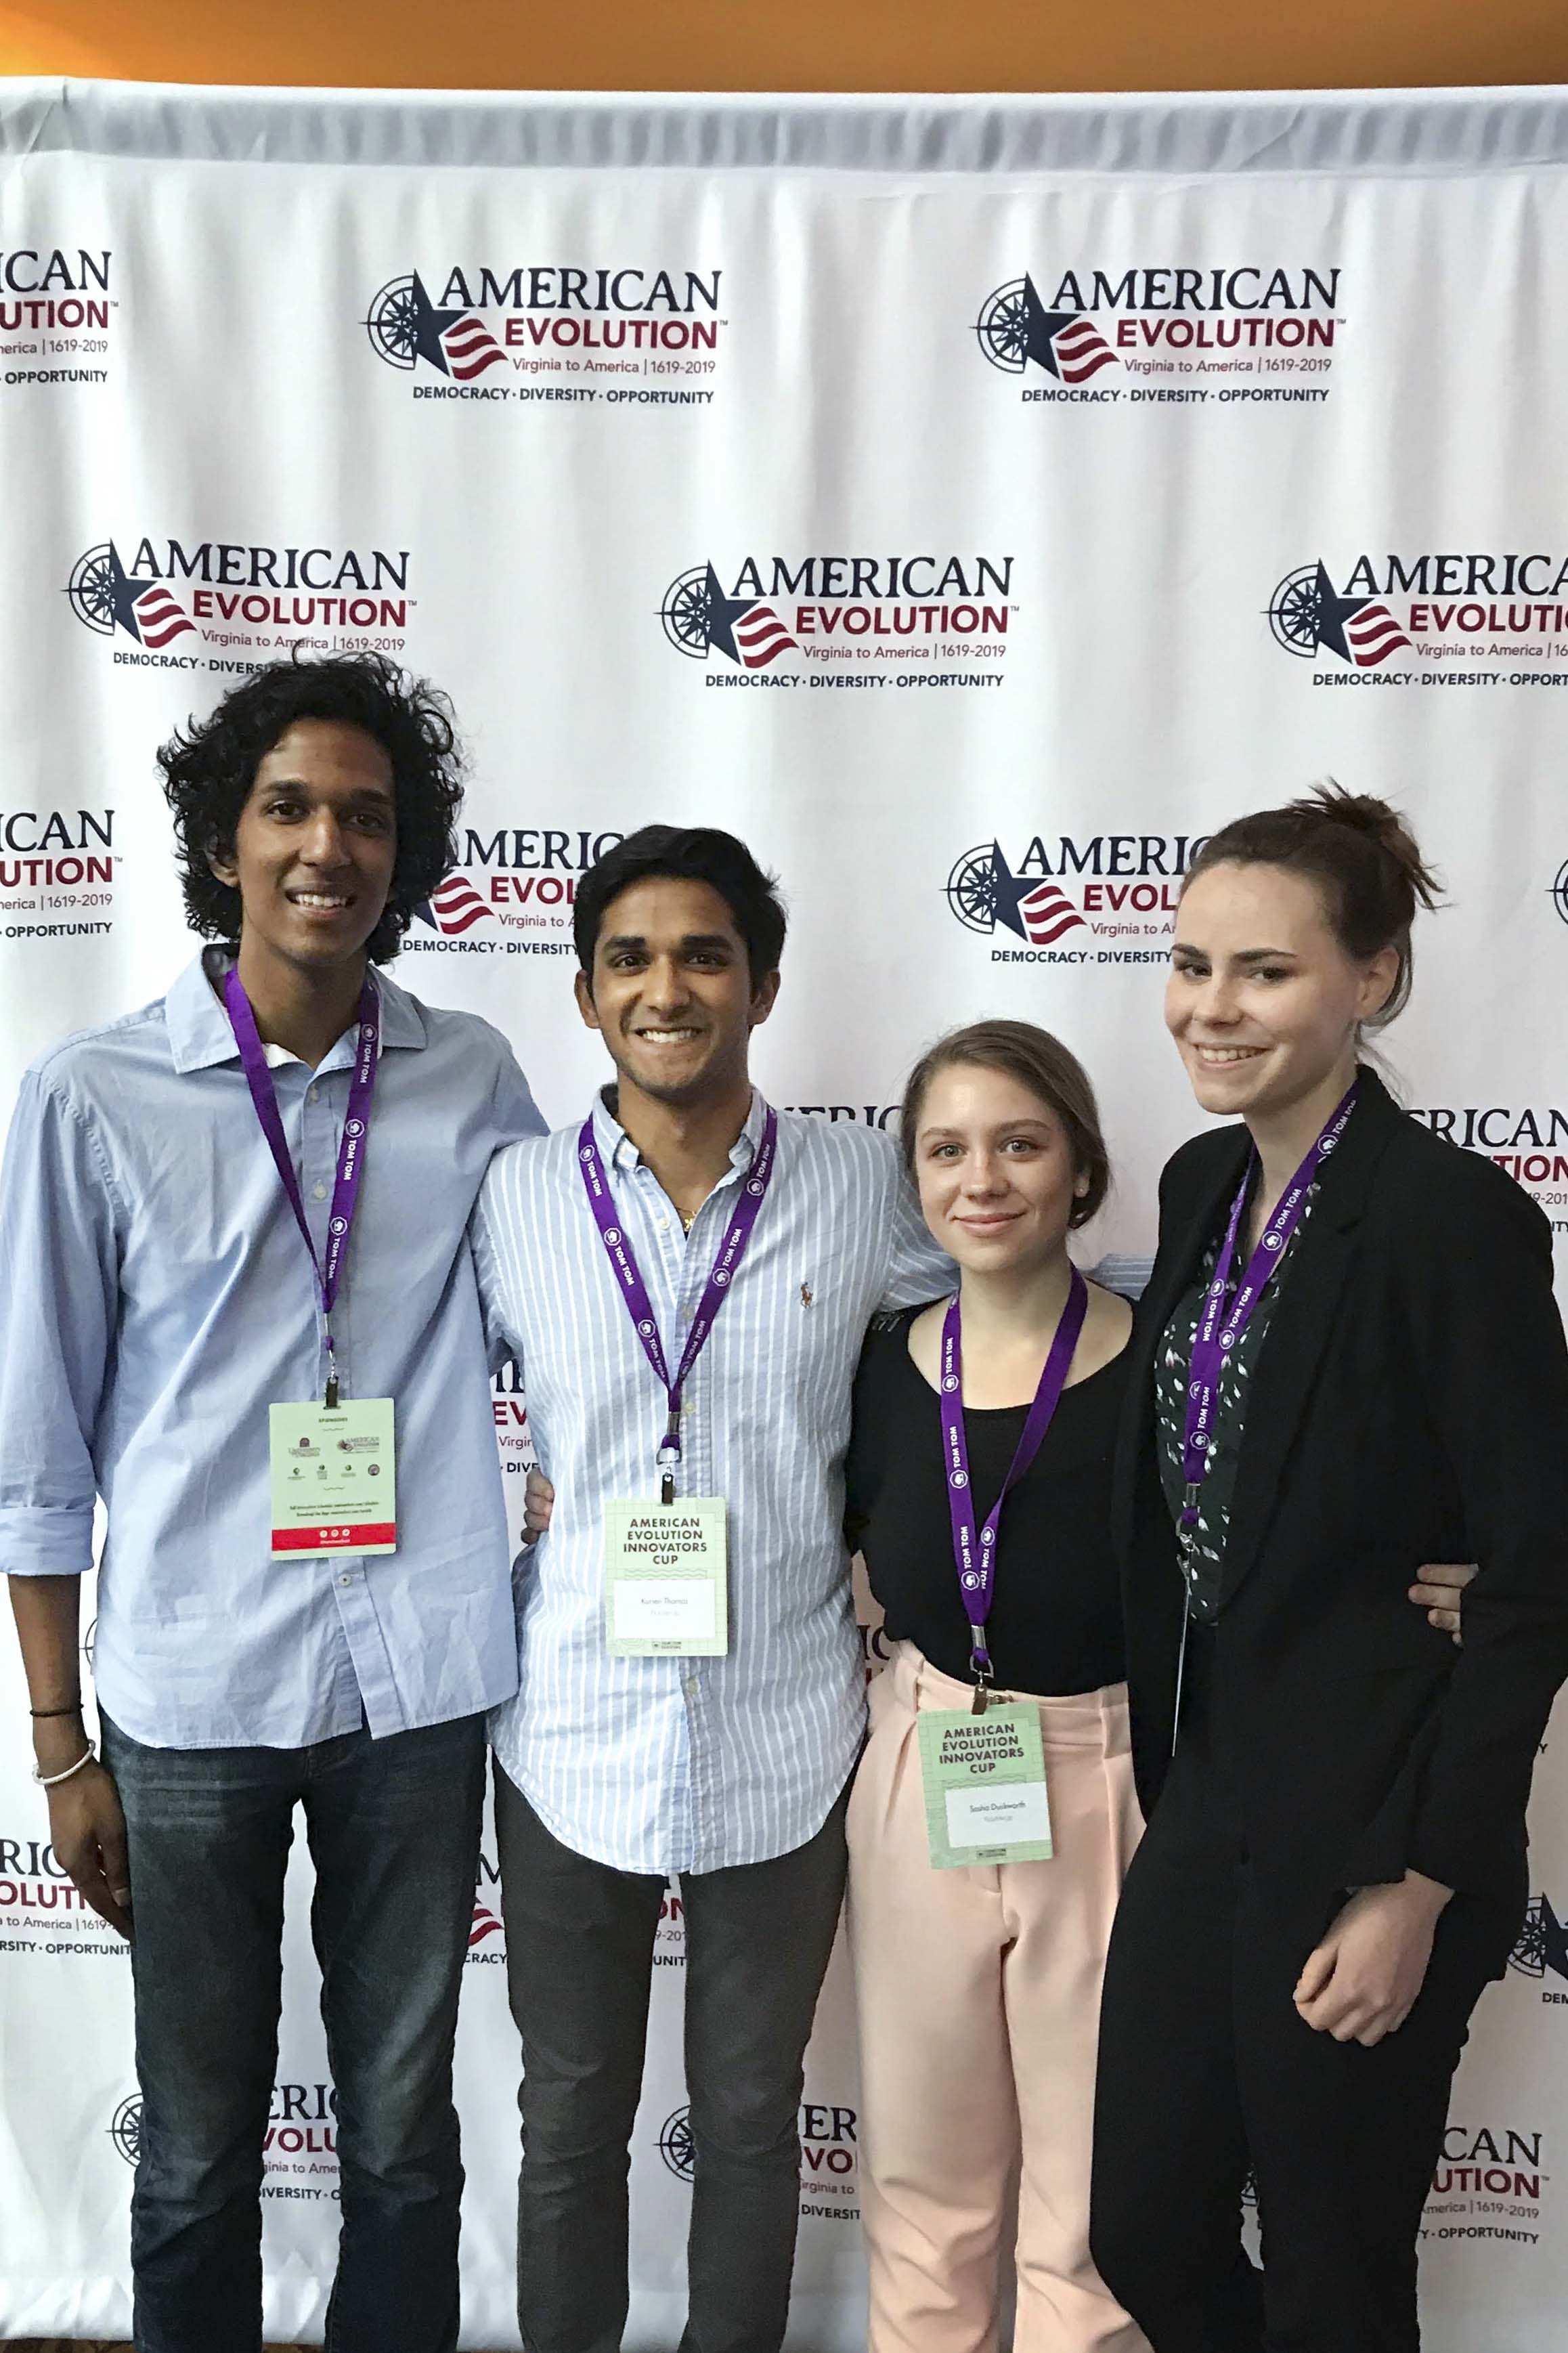 Kurien Thomas, second from left and Sasha Duckworth, second from right stand for a group photo with two other people